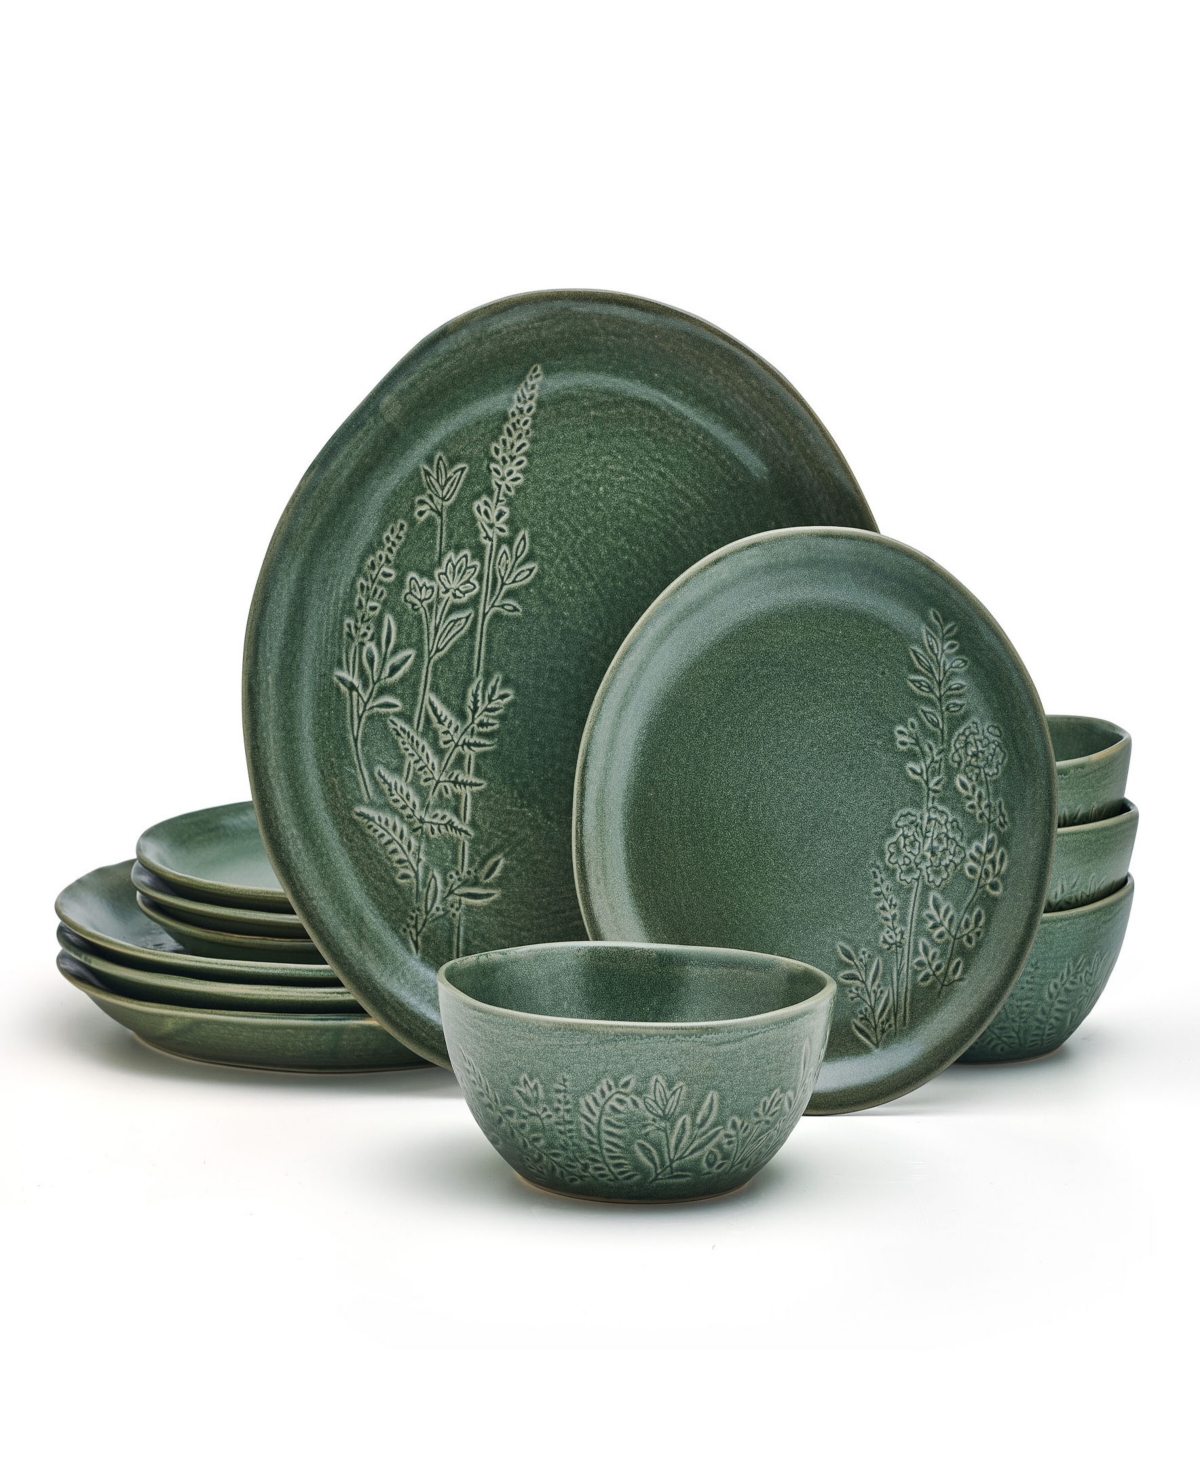 Carrie 12-Pc Dinnerware Set, Service for 4 - Green